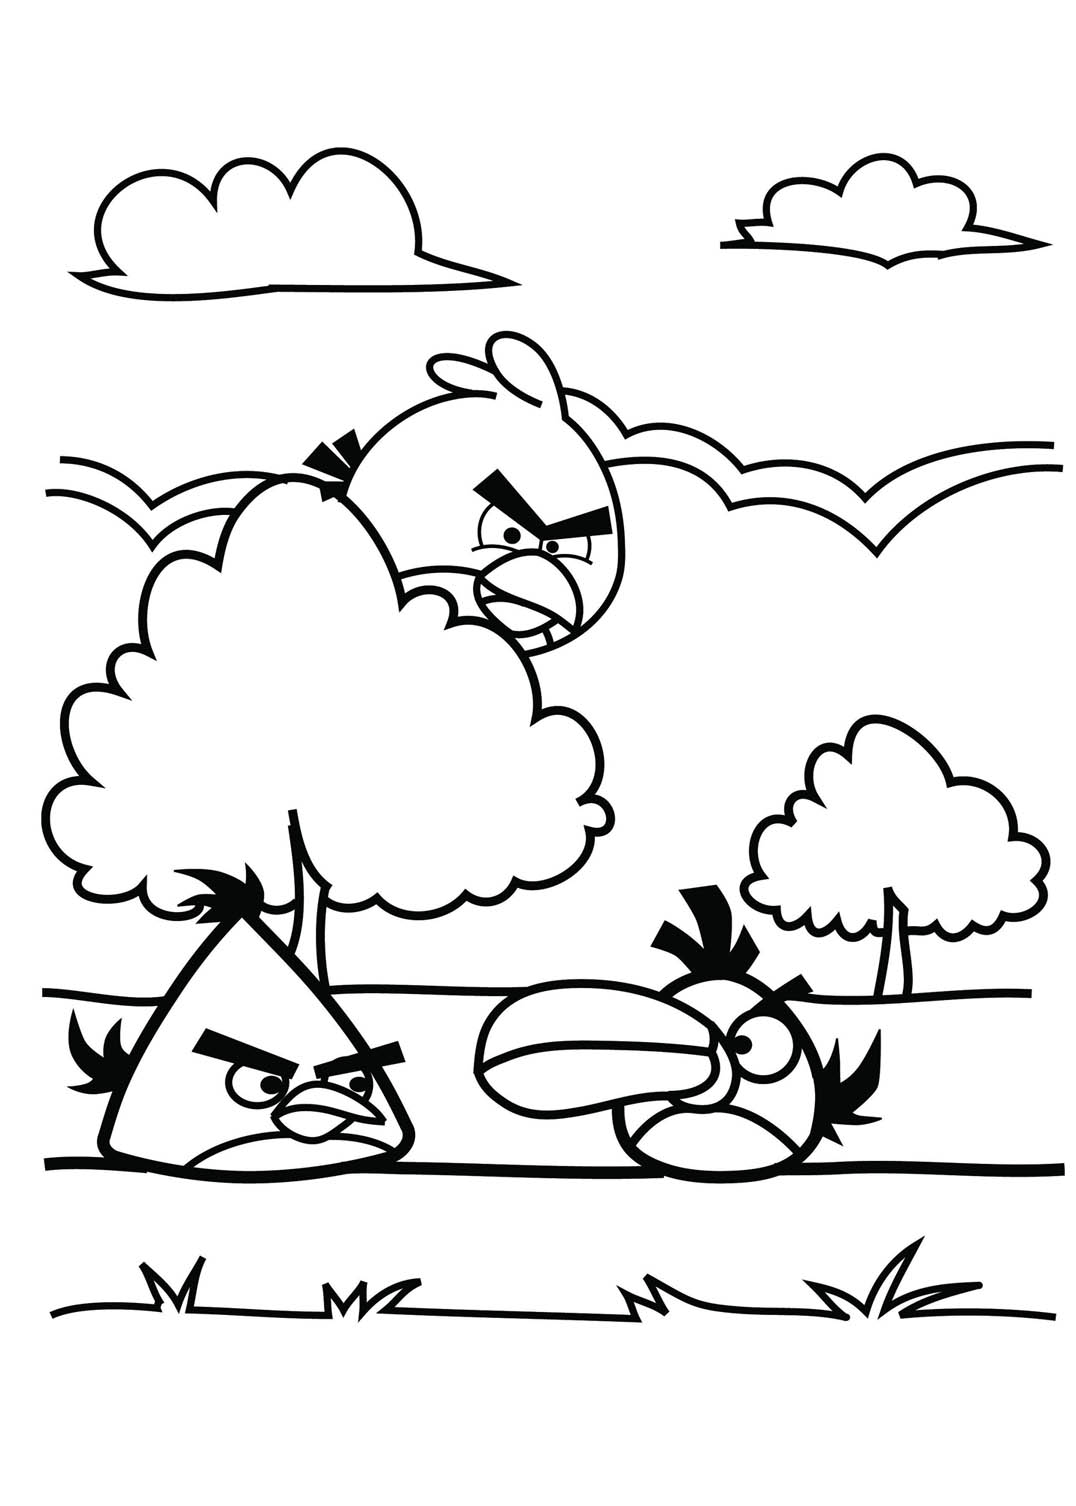 big pig angry birds coloring pages